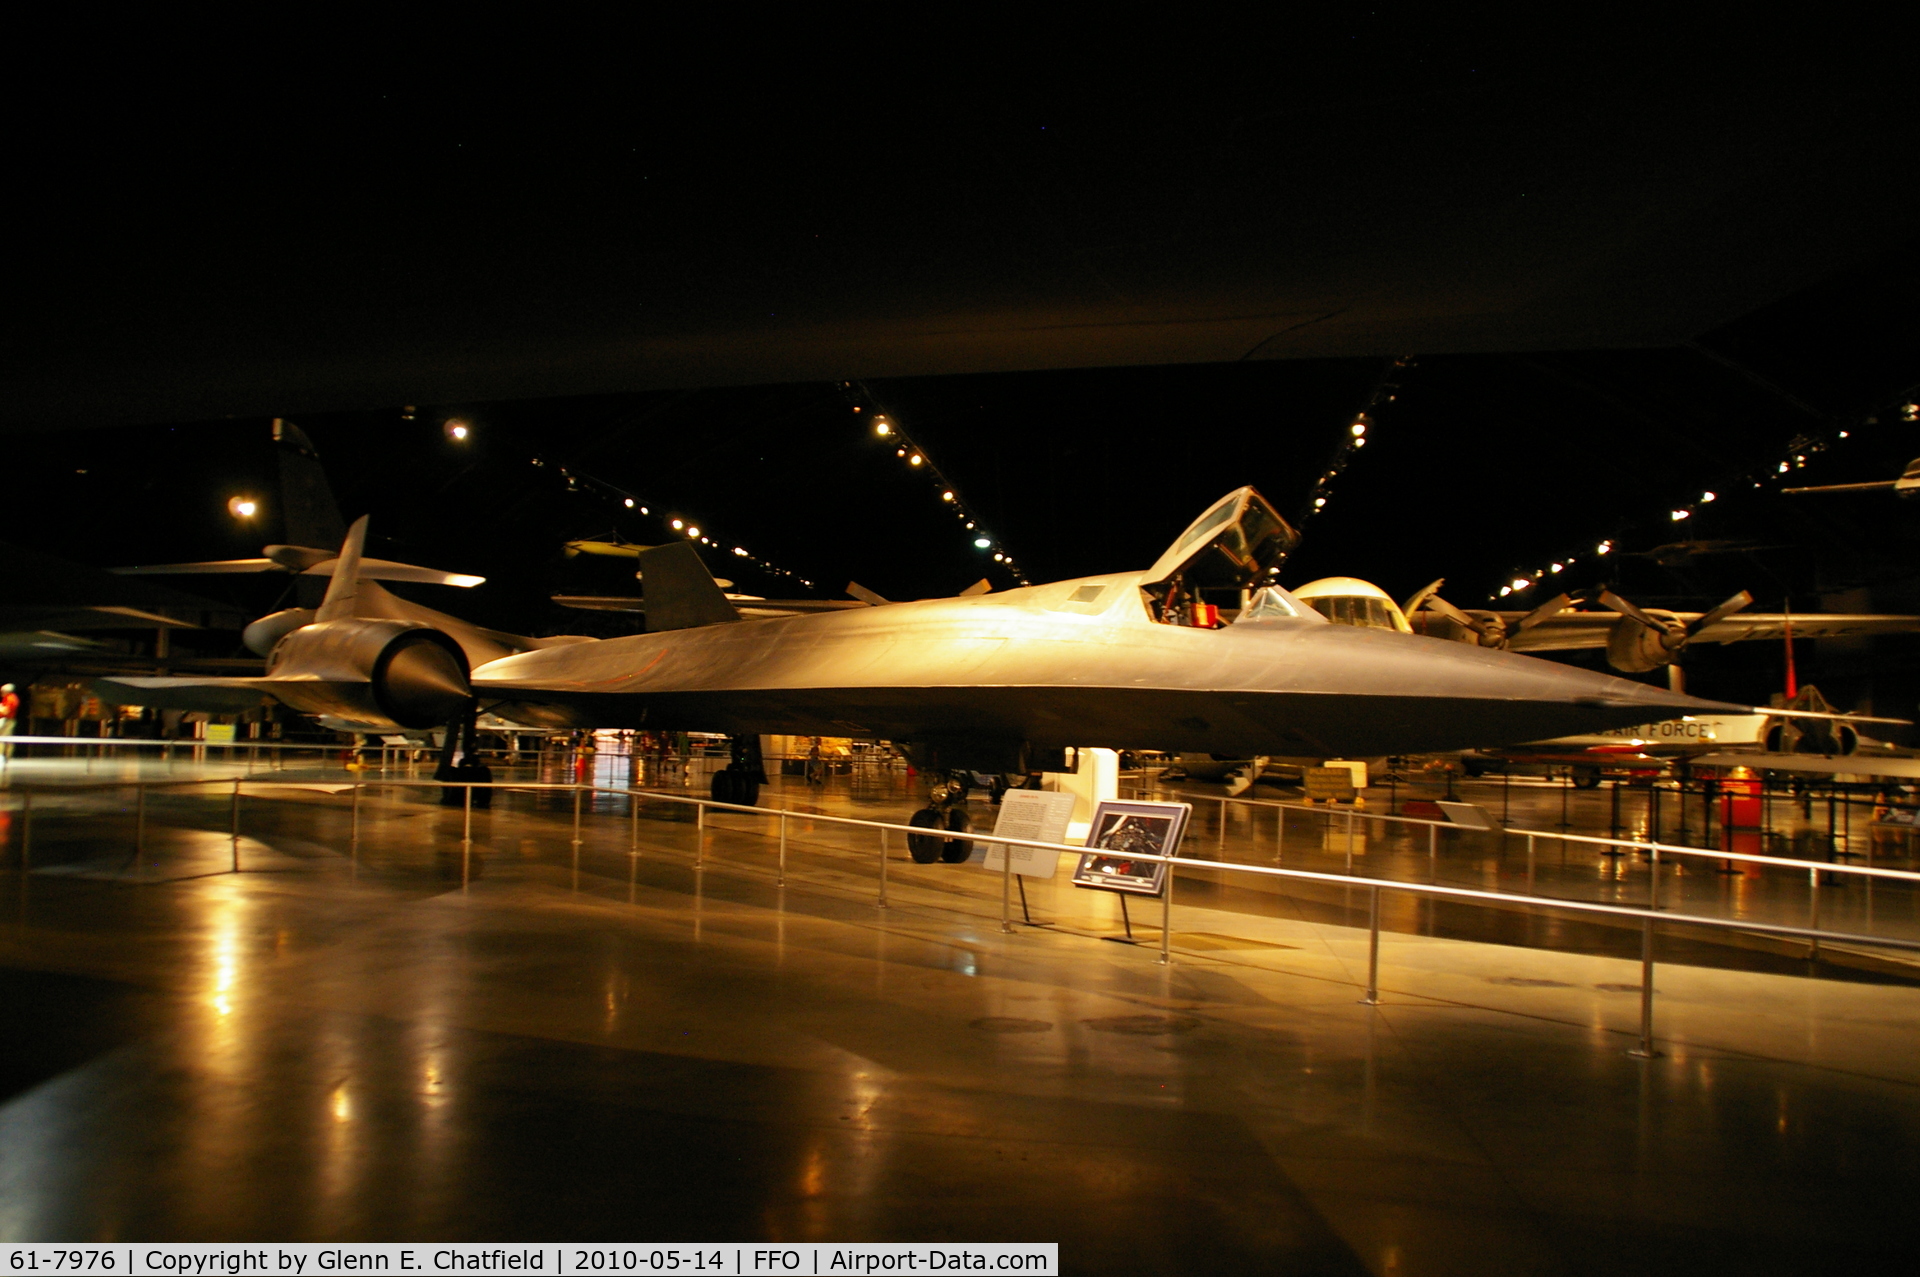 61-7976, 1961 Lockheed SR-71A Blackbird C/N 2027, At the National Museum of the USAF